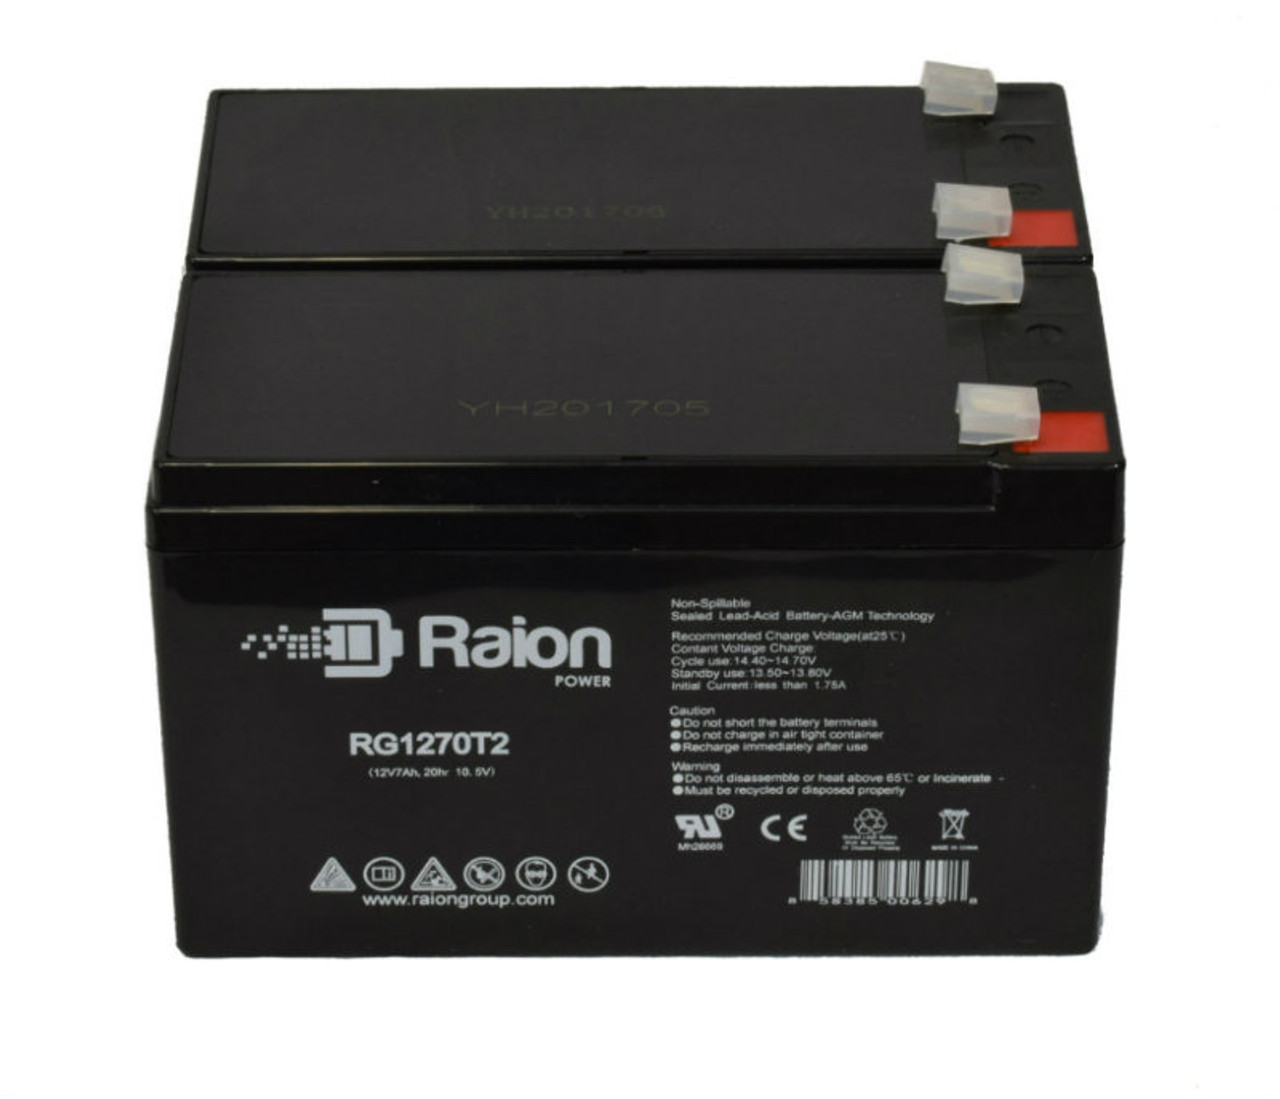 Raion Power Replacement 12V 7Ah Battery for Green Cell AGM05 F1 - 2 Pack